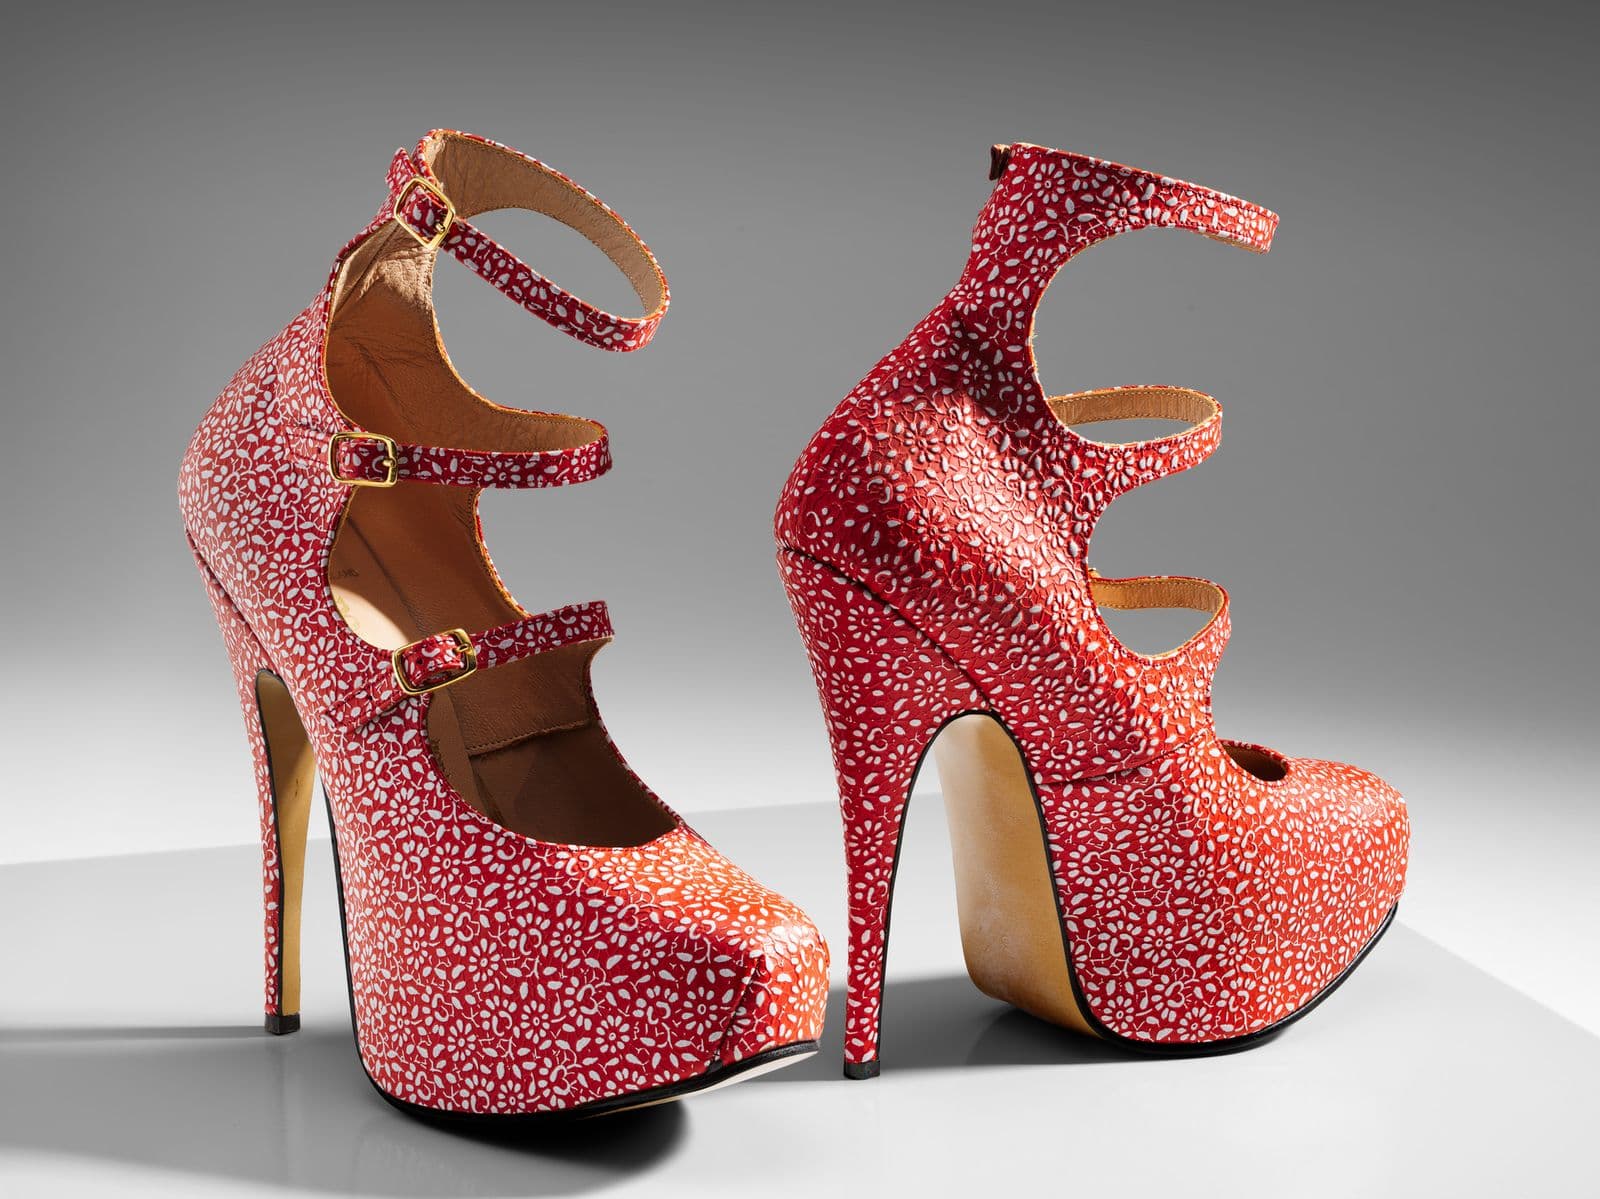 Pair of Red stiletto shoes with white flower detailing